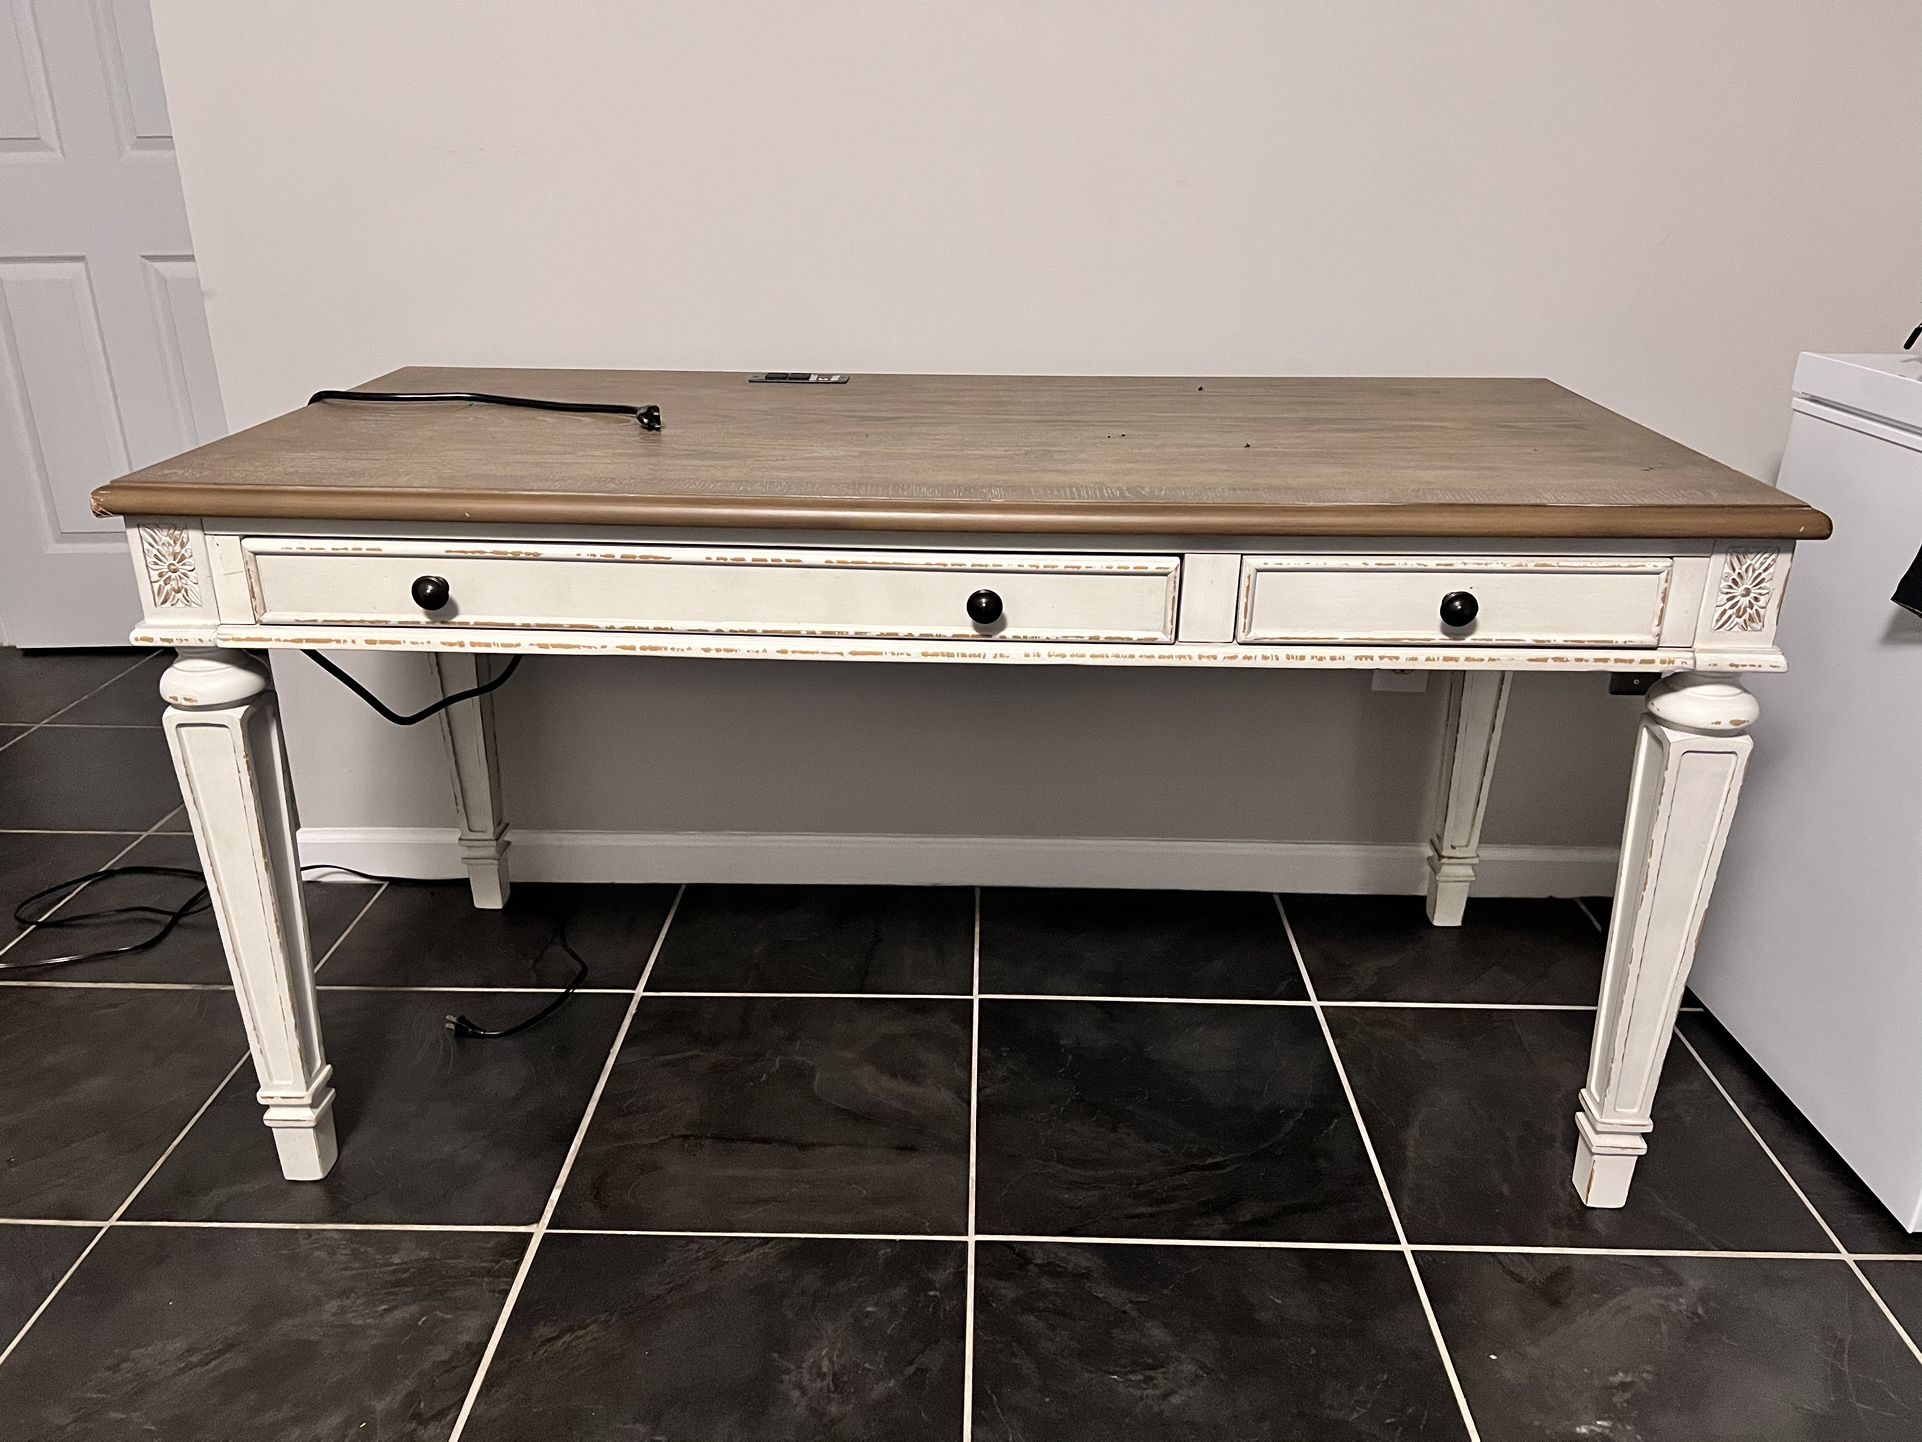 [LOCAL PICKUP ONLY] Antique Work Desk - white & brown